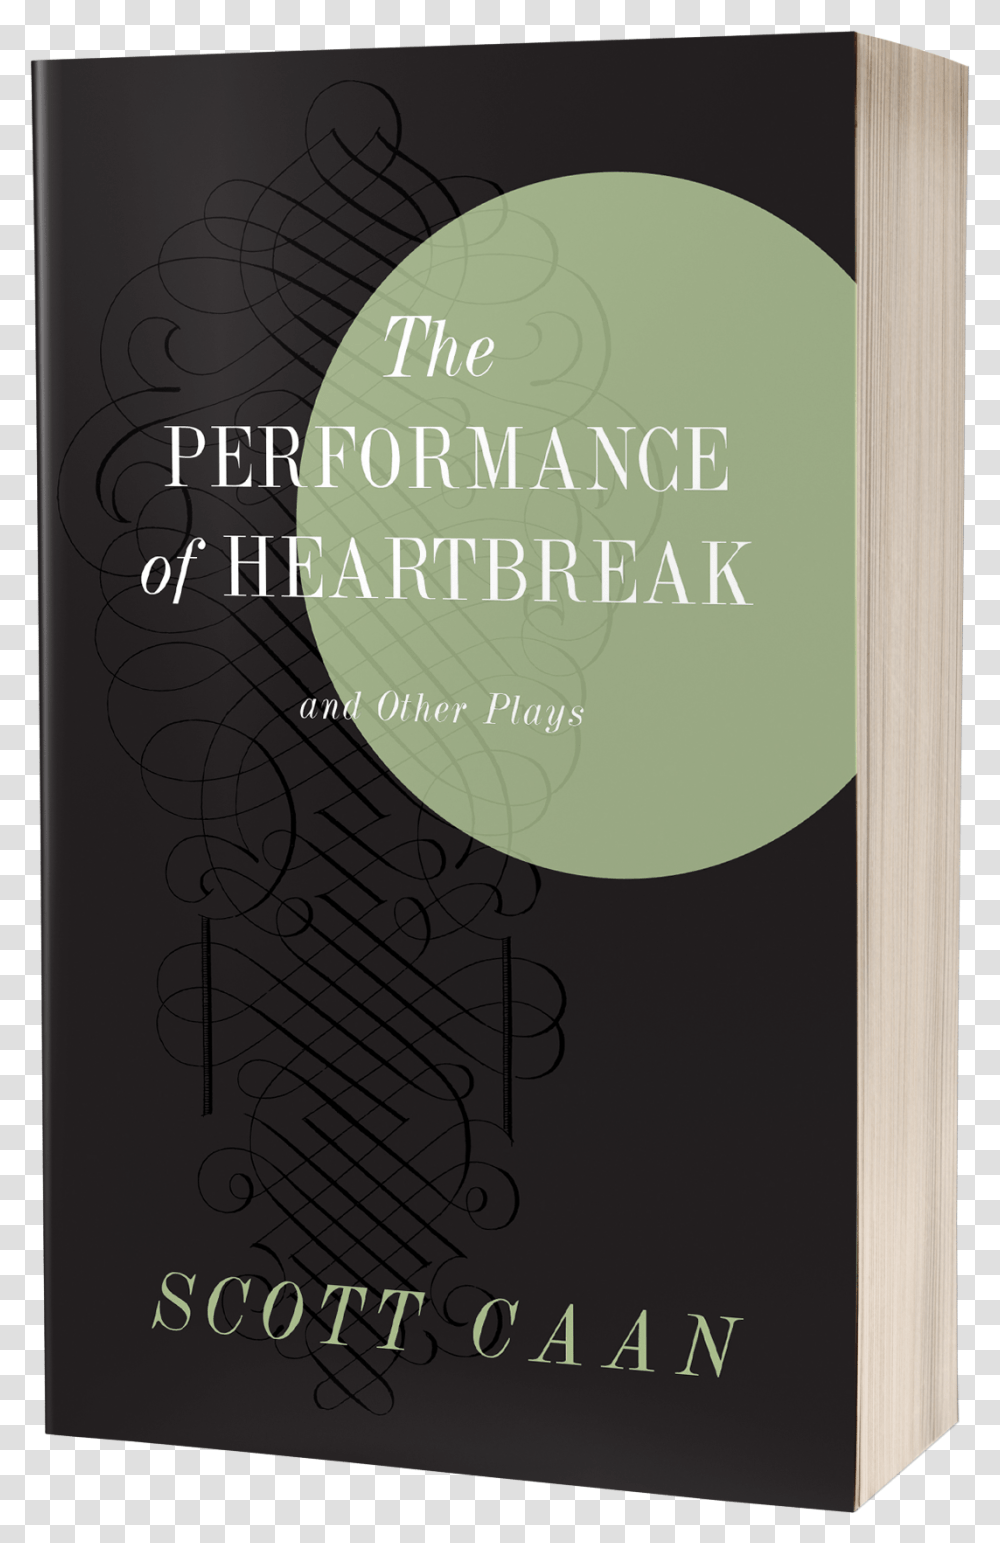 The Performance Of Heartbreak Book Cover, Poster, Advertisement, Novel Transparent Png